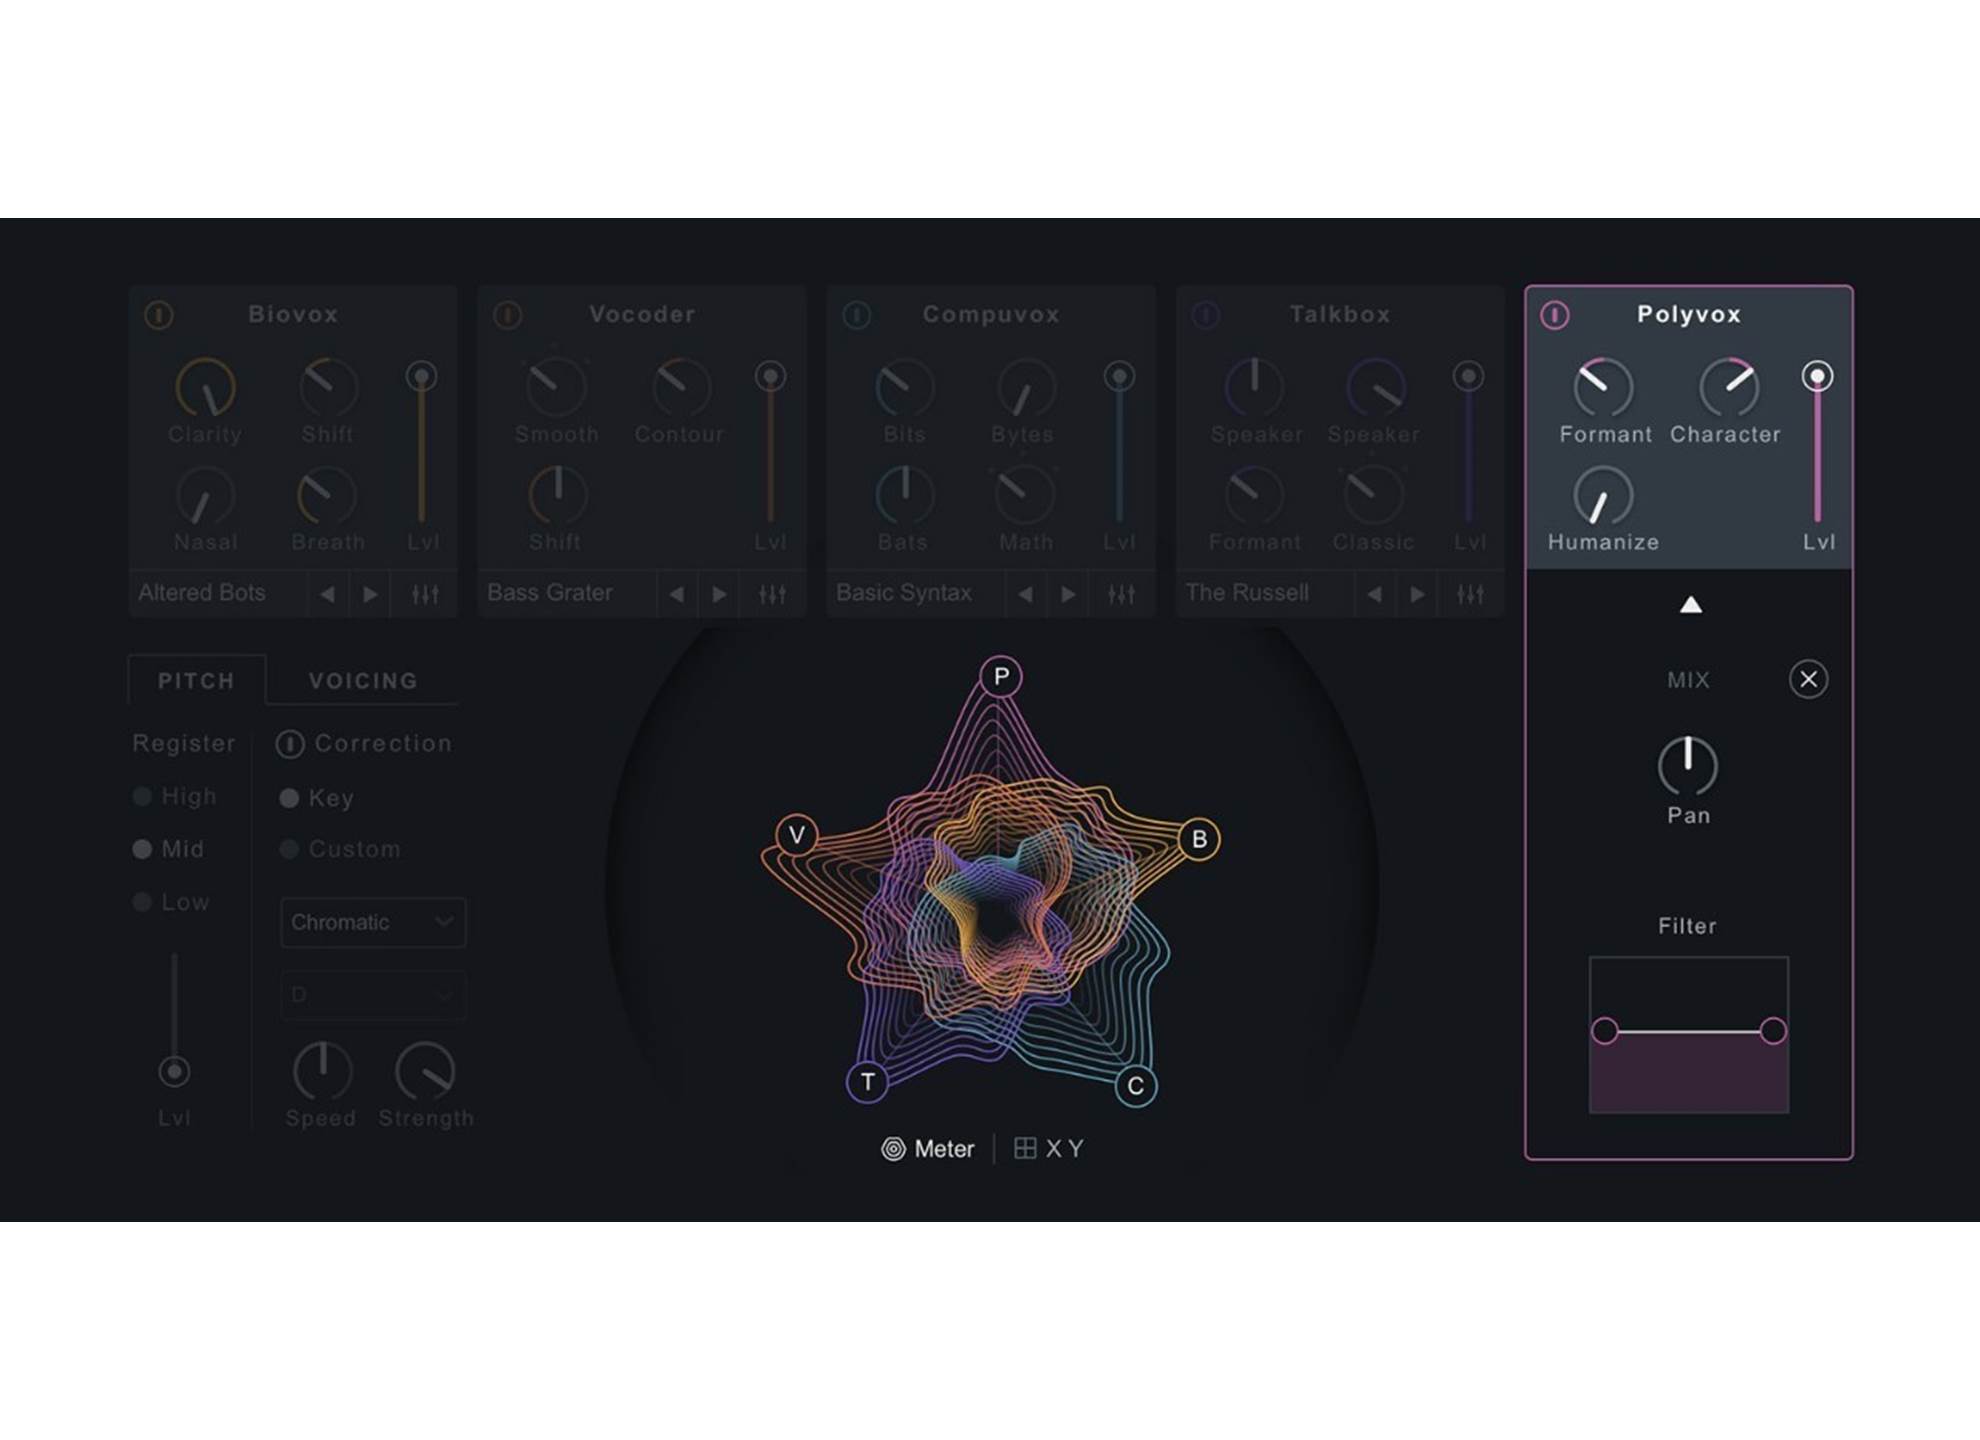 iZotope VocalSynth 2.6.1 instal the last version for ios